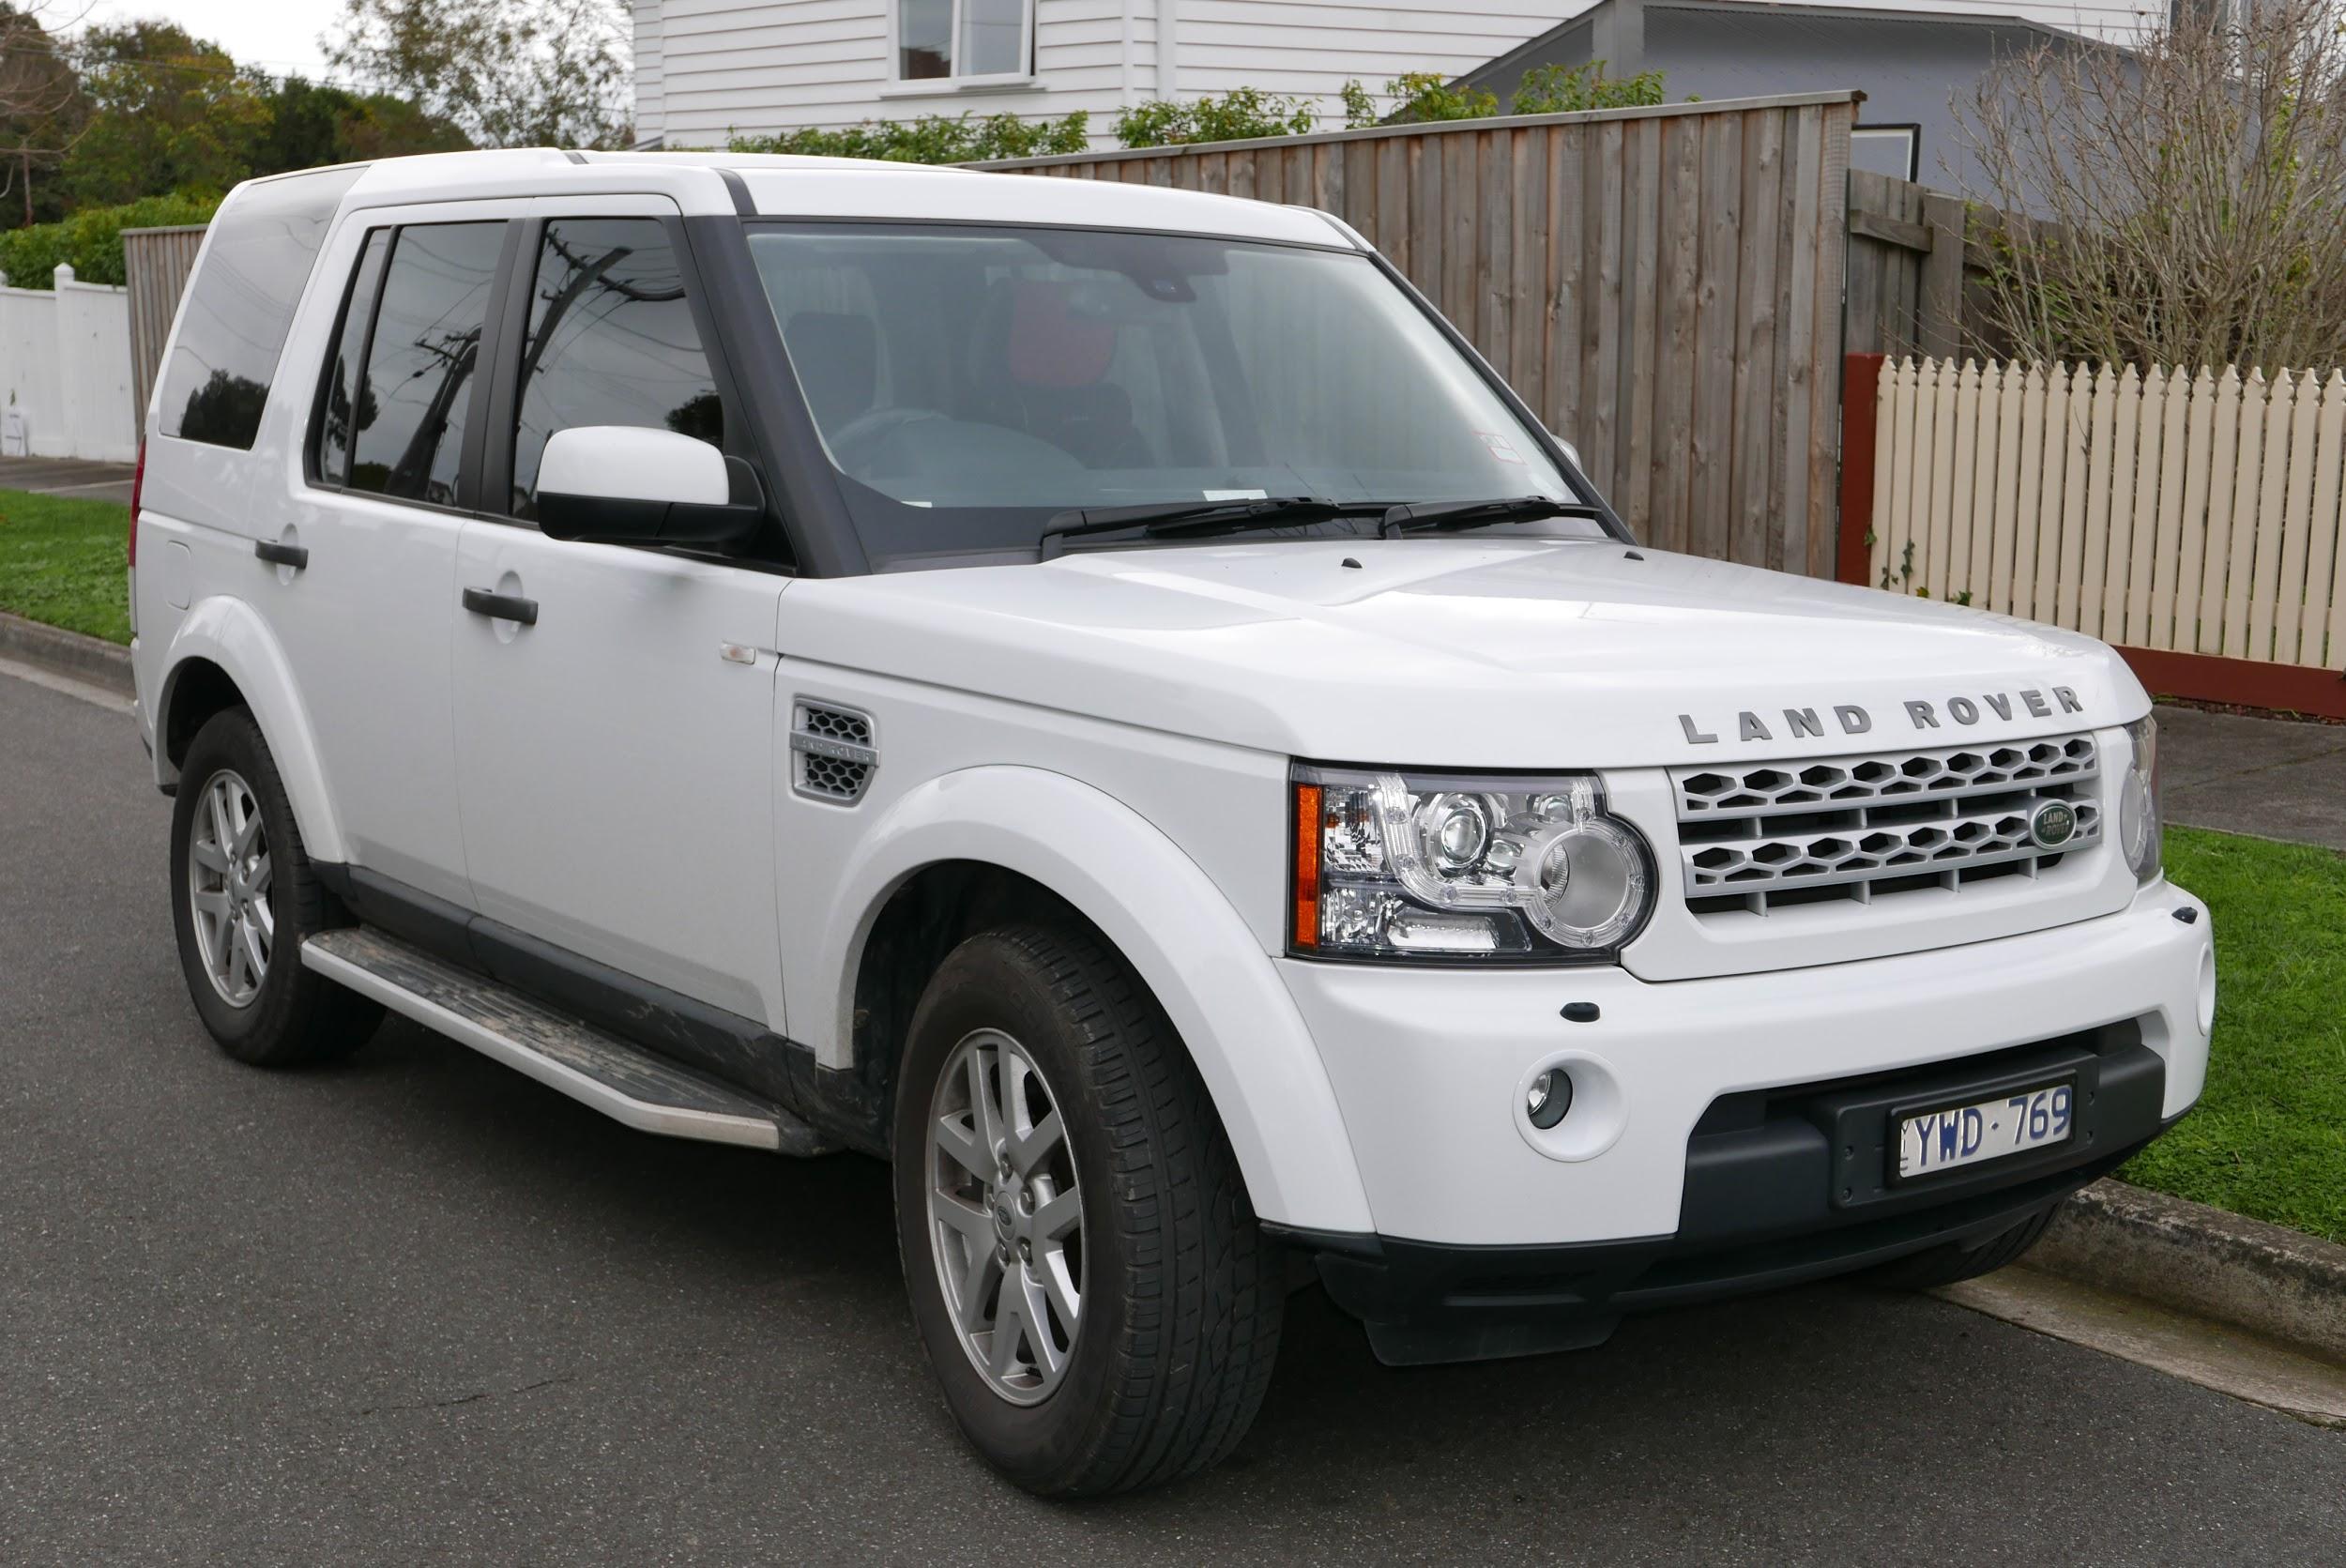 Land Rover Discovery 4 Reviewing the Perfect Offroader